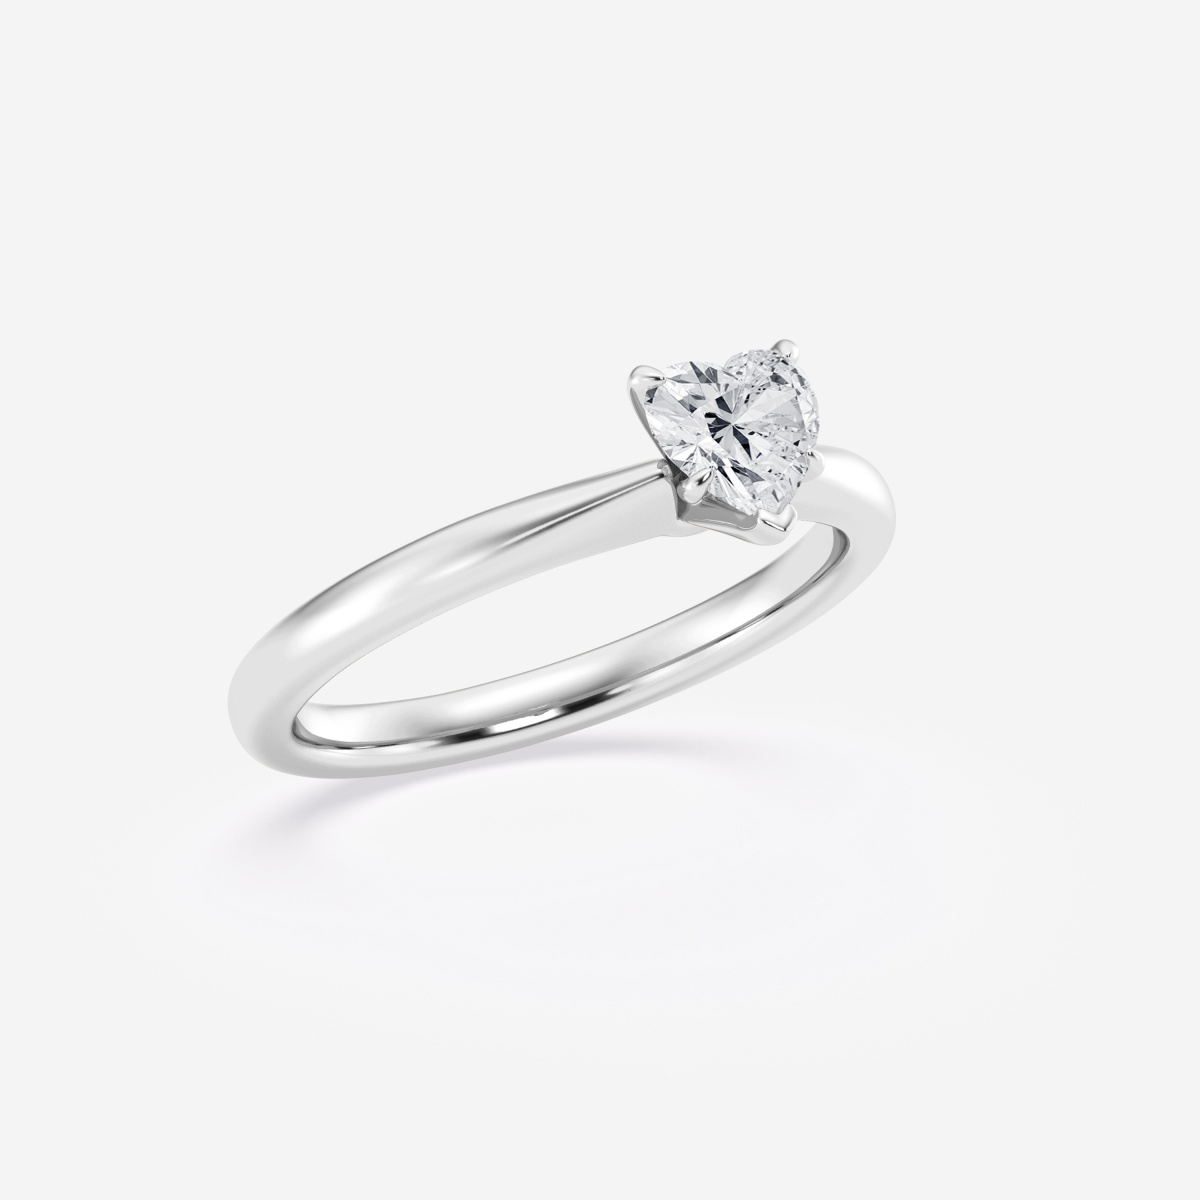 Additional Image 1 for  1/2 ctw Heart Lab Grown Diamond Petite Solitaire Engagement Ring